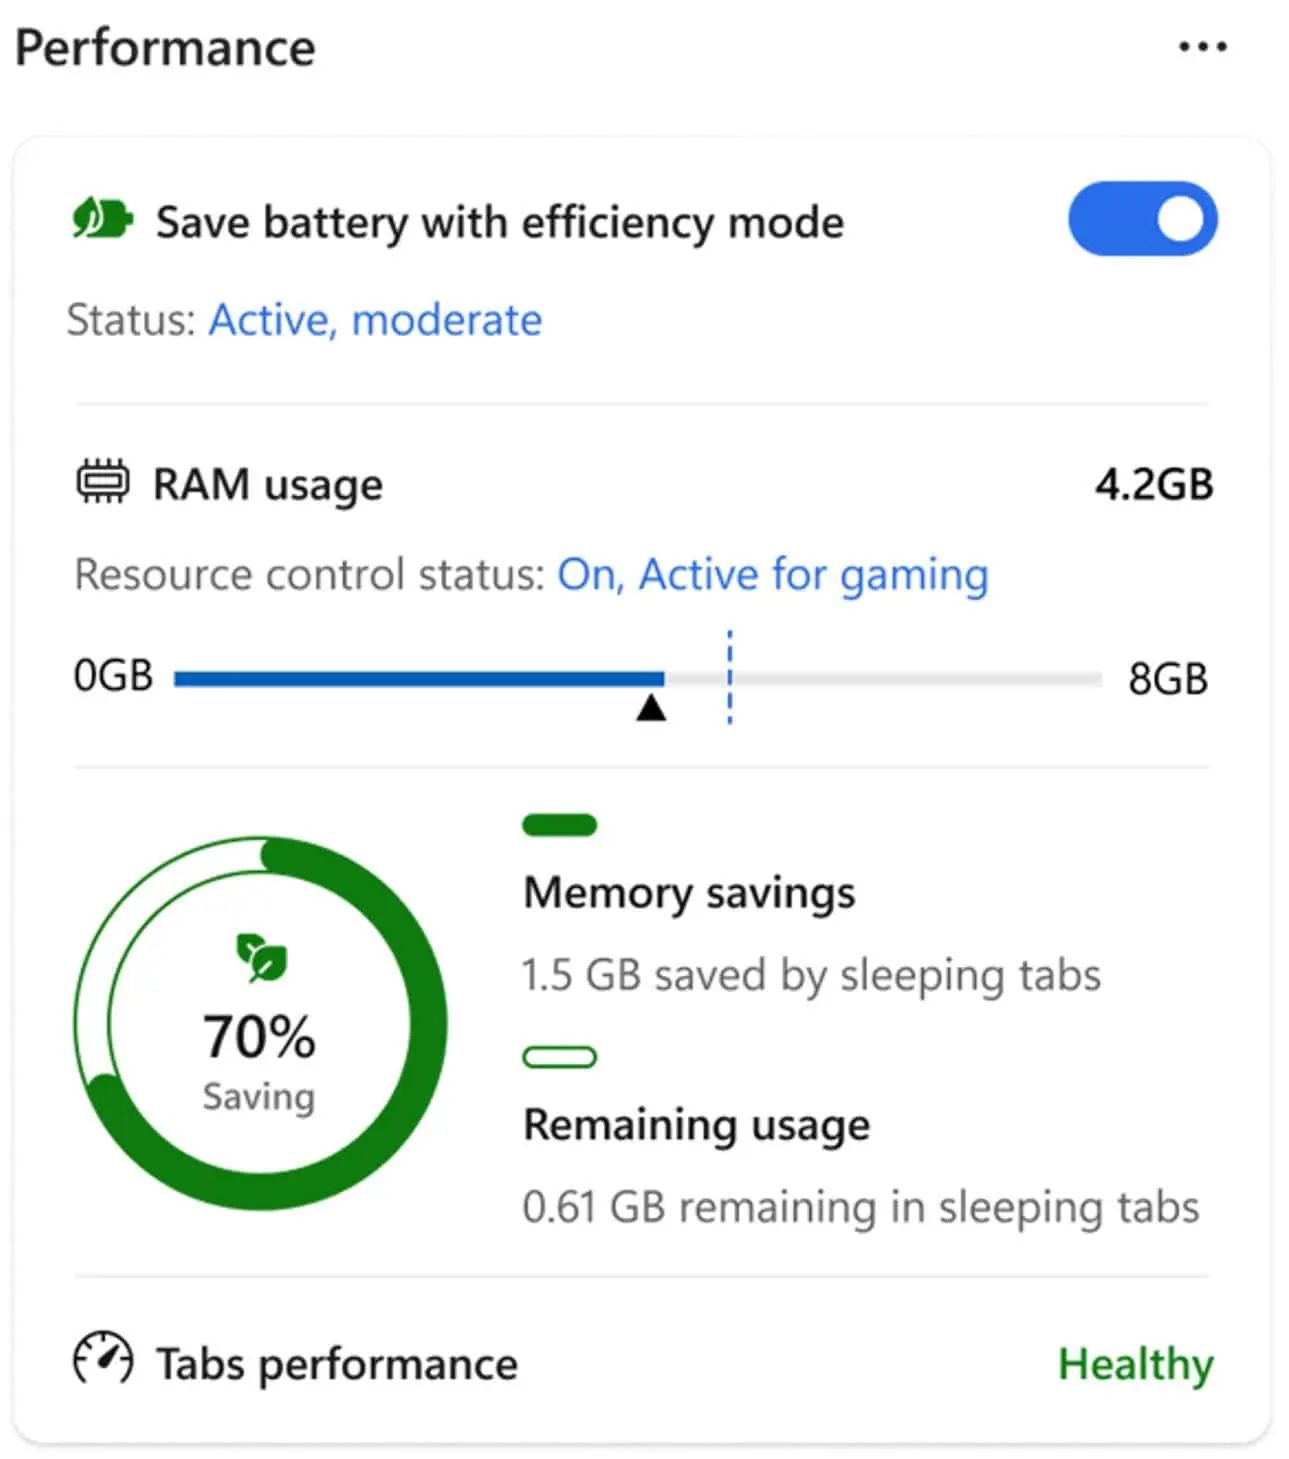 Users can adjust RAM usage from 1GB to device's maximum with a simple slider